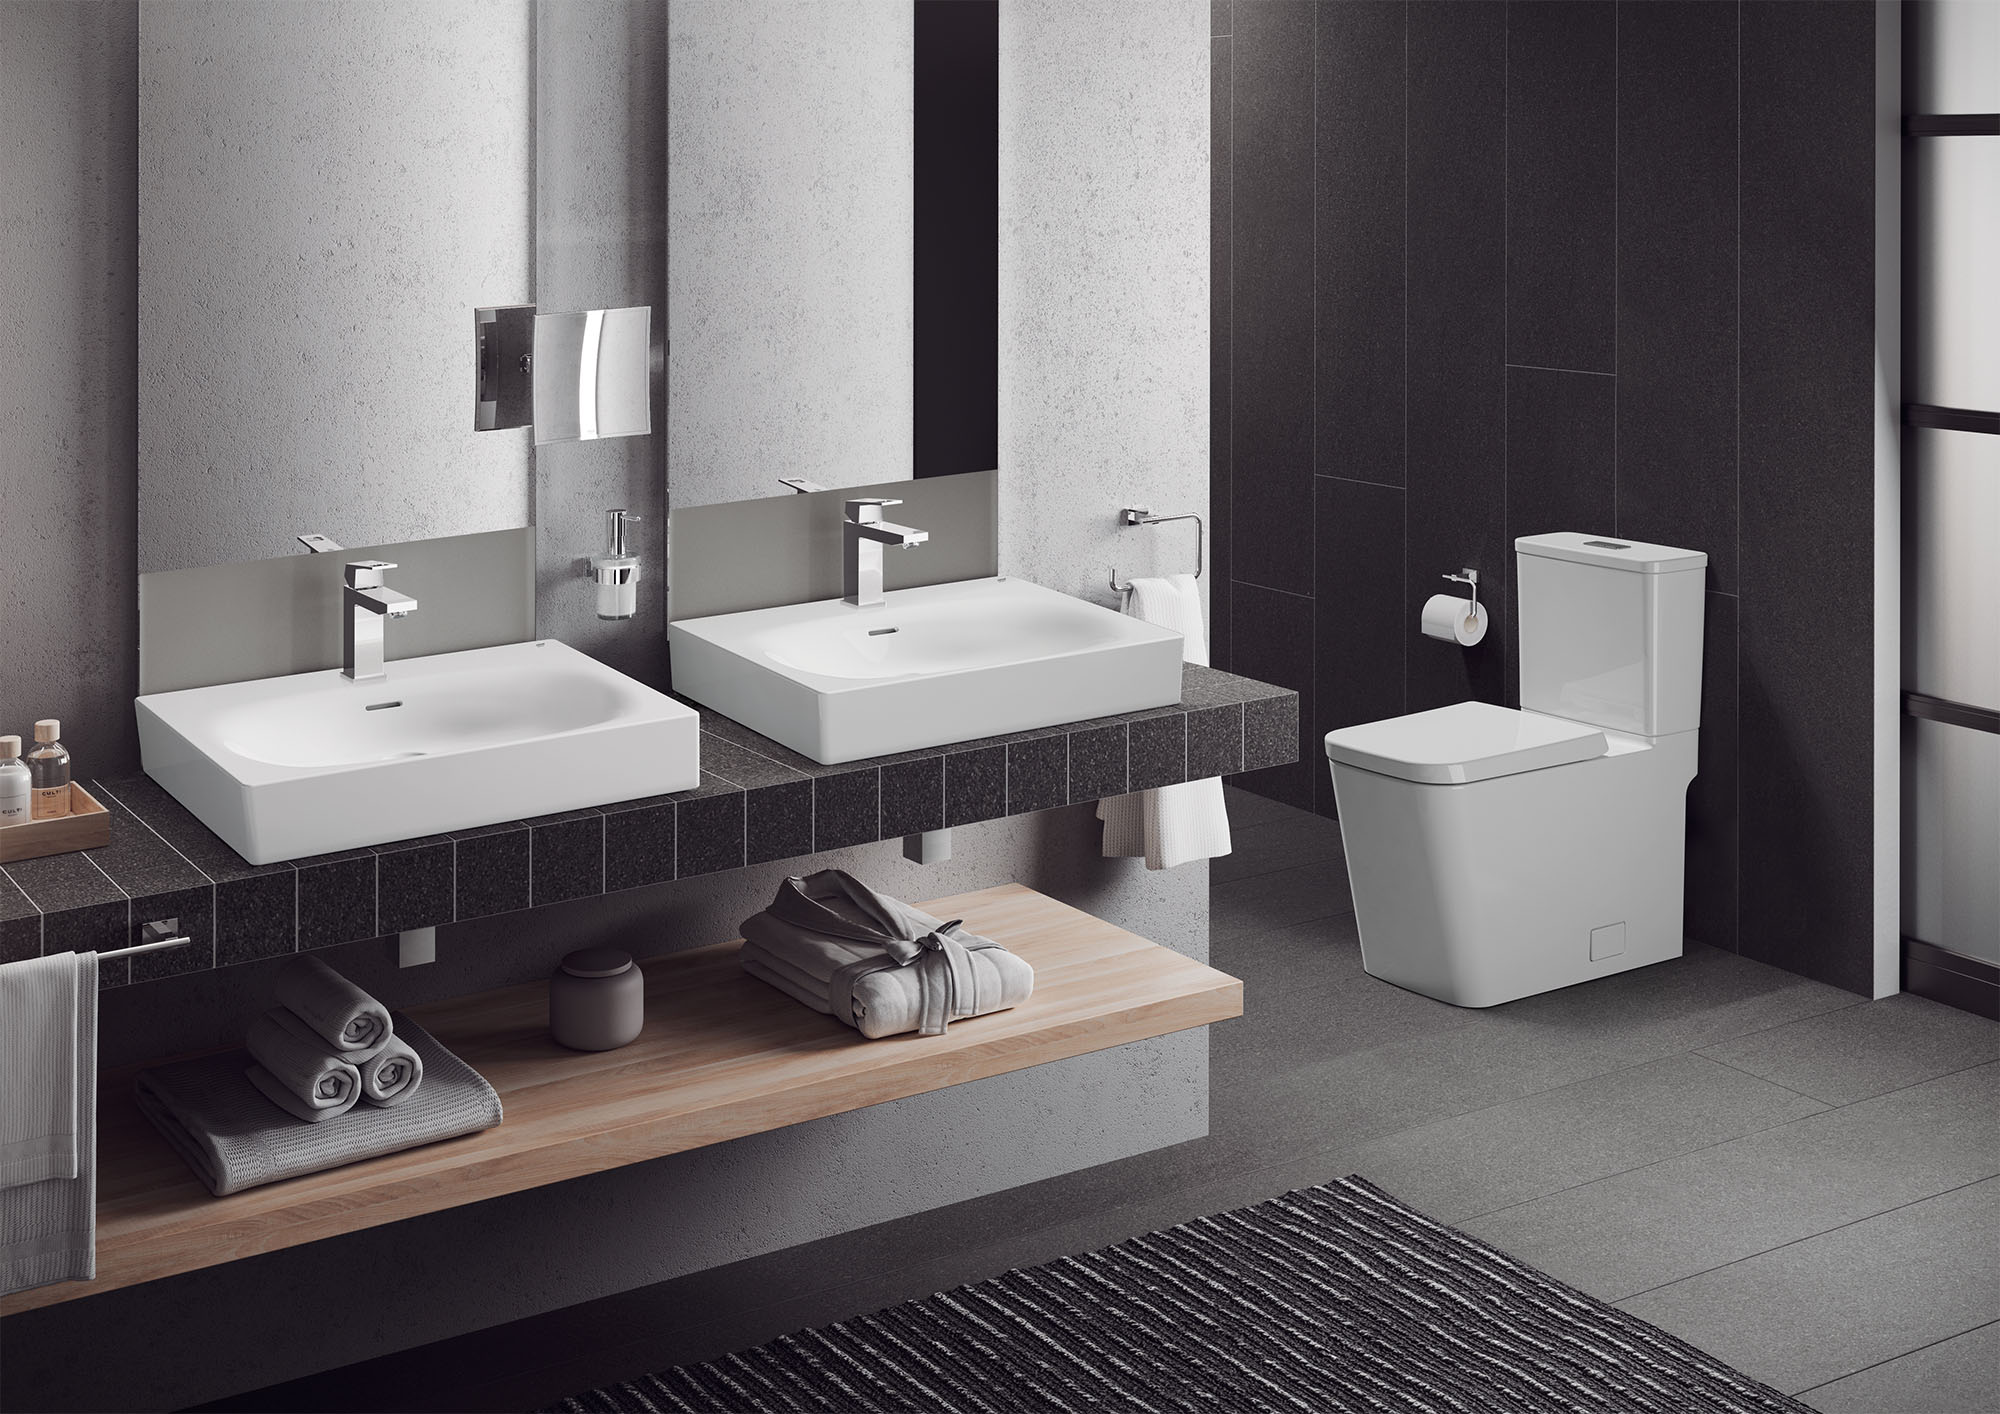  Grohe  Now Offering Full Suite of Modern and Contemporary 